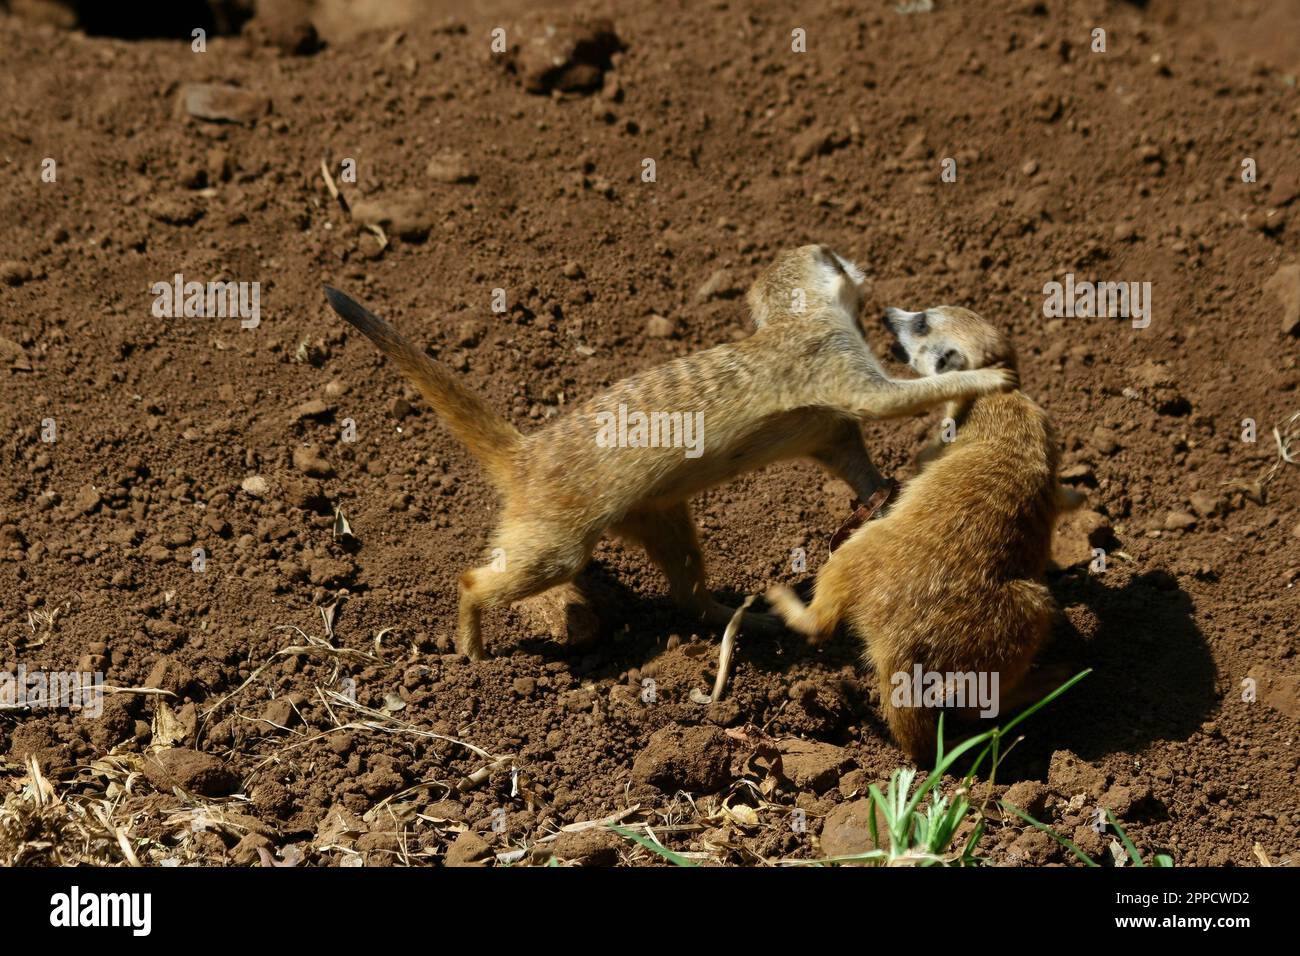 The meerkat is a colonial carnivorous mammal, 24 to 30 cm long, native to Africa. Stock Photo